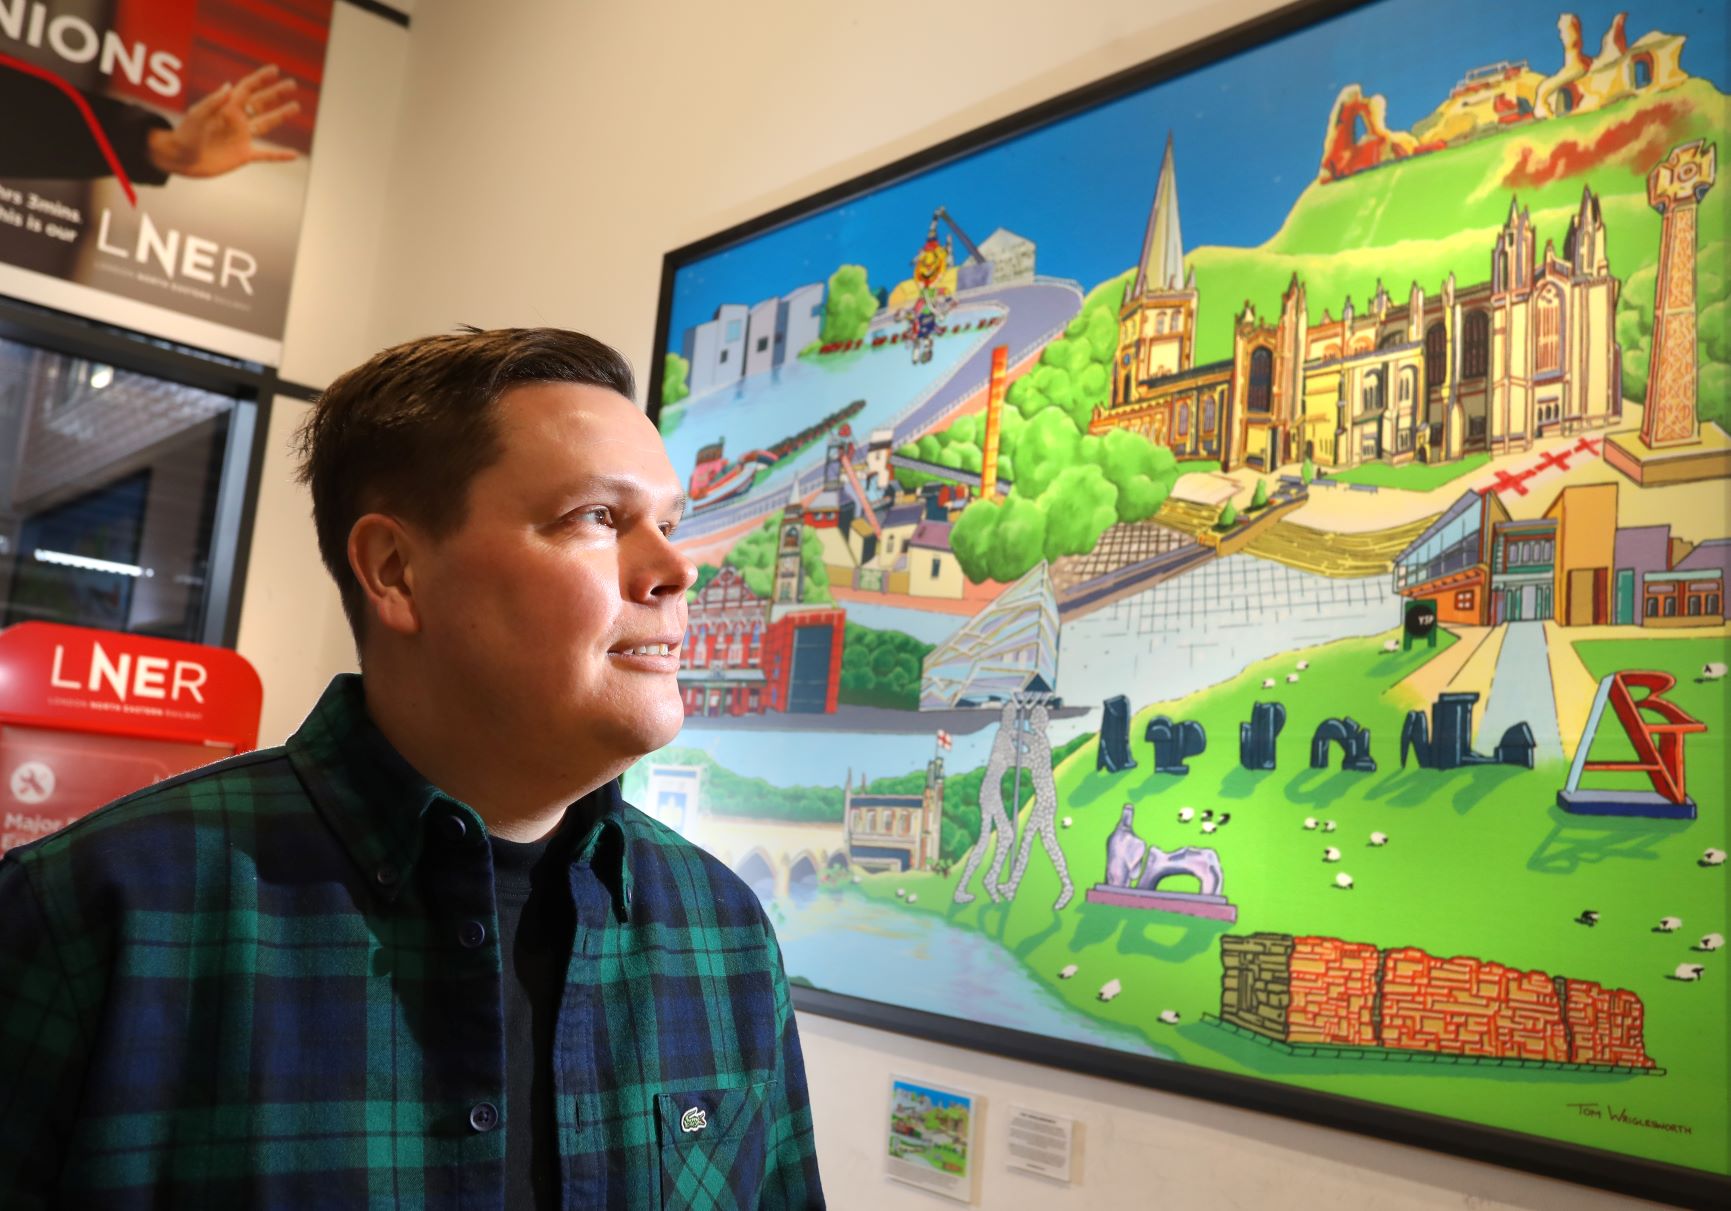 Picture Perfect Wakefield Celebrated In New Vibrant Station Artwork